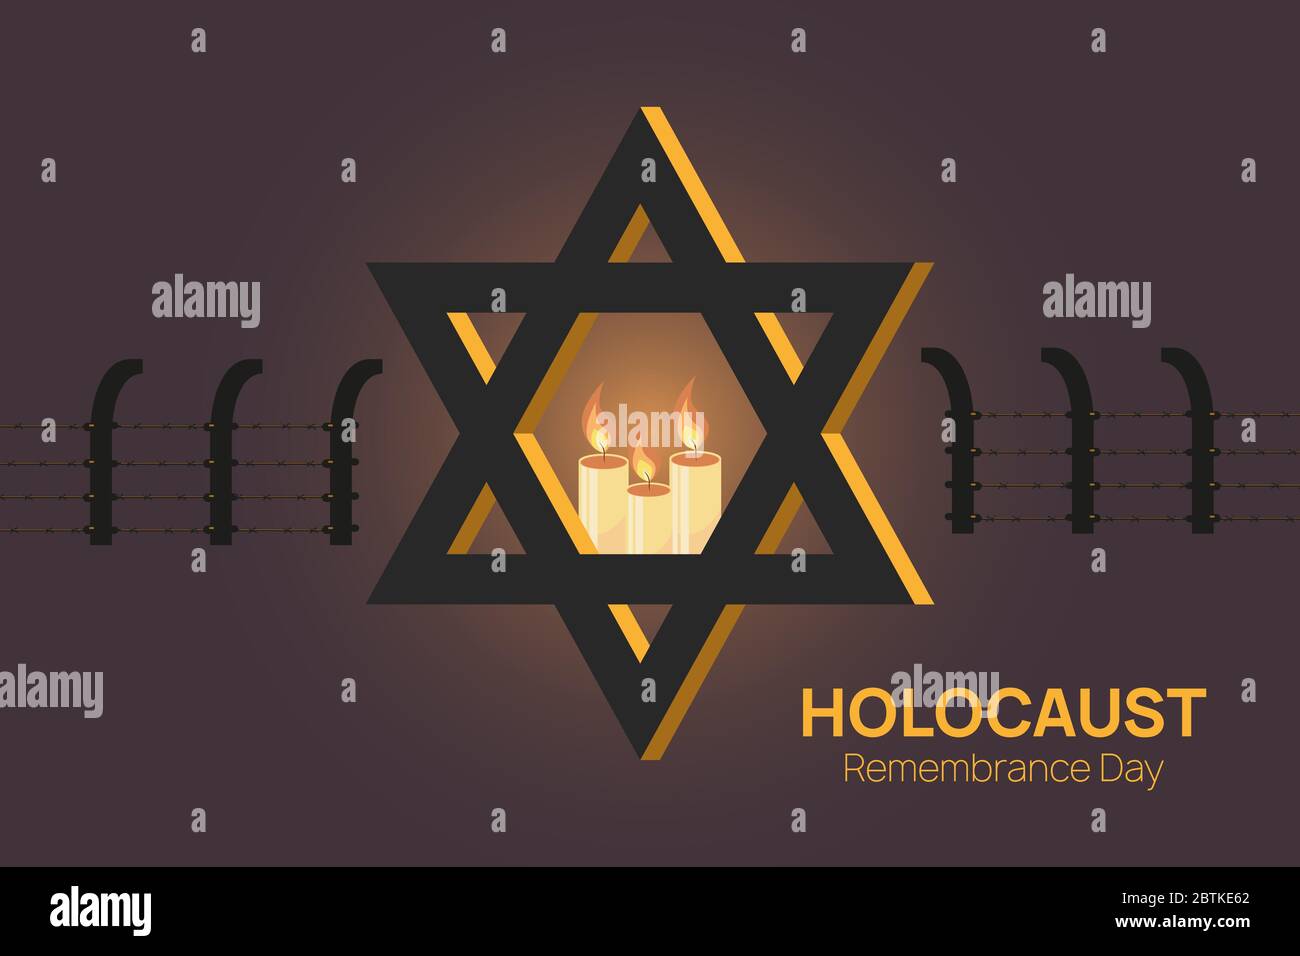 Holocaust Remembrance Day 27th of January Template. Jewish Star of David and Three Candles among barbed wire. Vector illustration Stock Vector